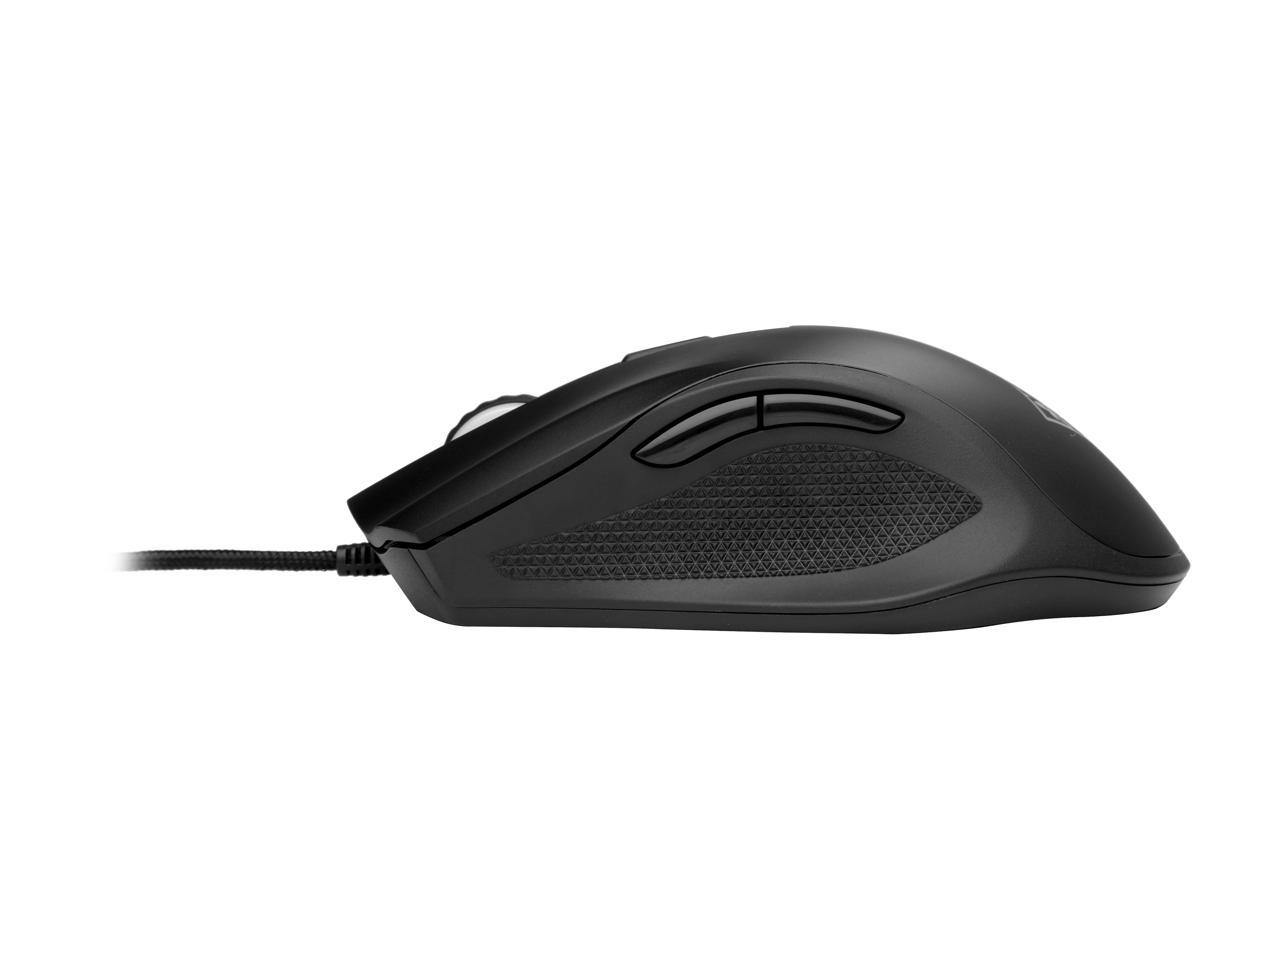 OMEN by HP Mouse 600 Wired Optical Gaming Mouse with 6 Buttons, 12000 dpi, RGB Backlit LED